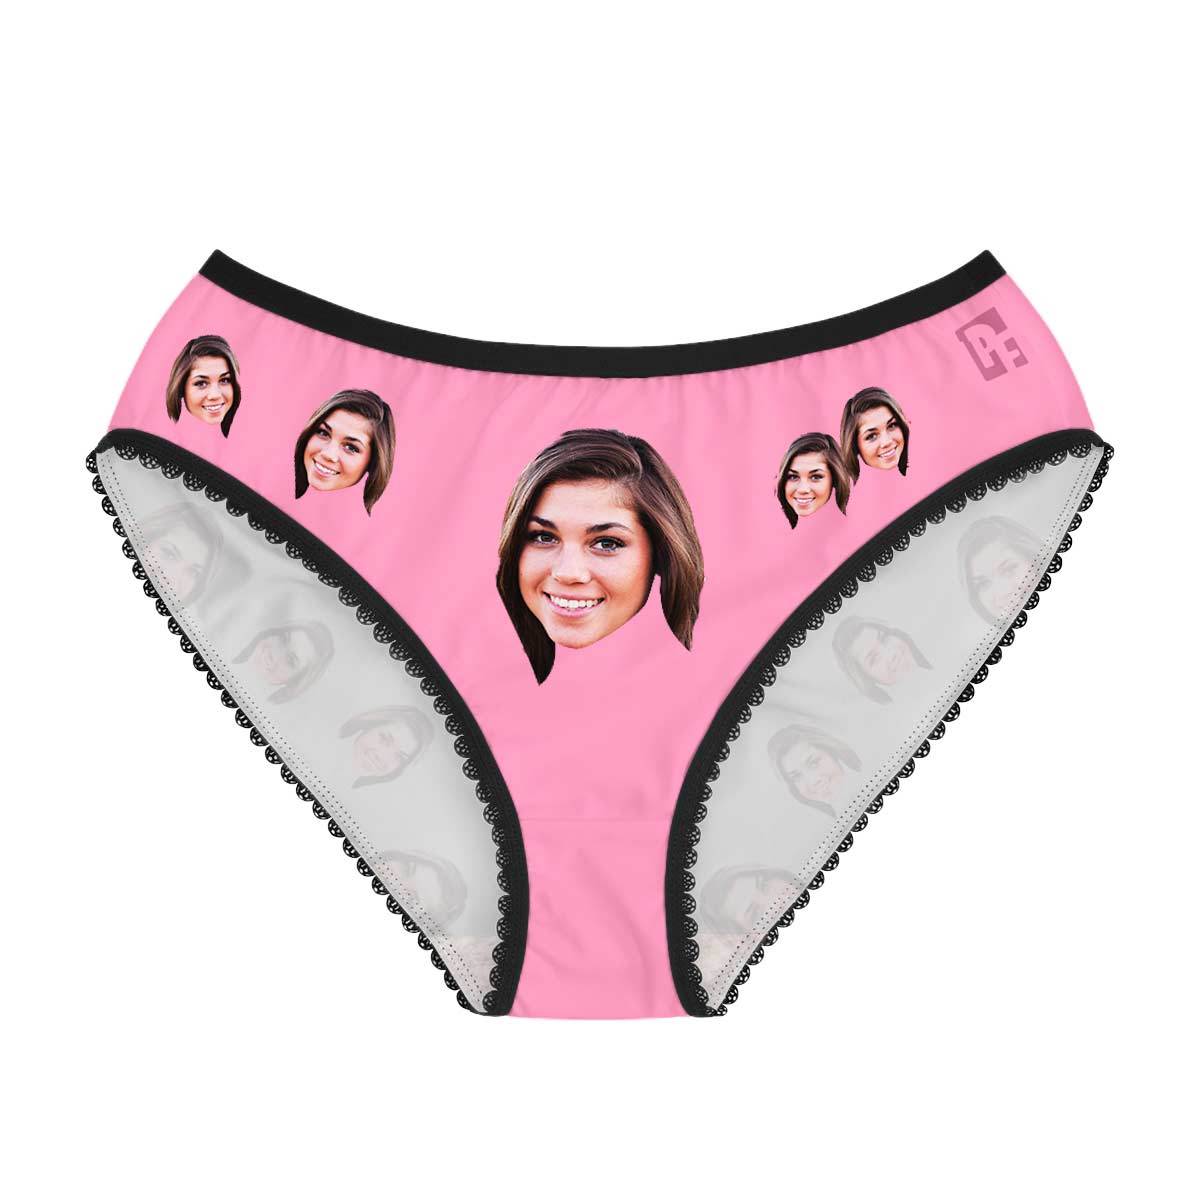 Red Blank Design women's underwear briefs personalized with photo printed on them